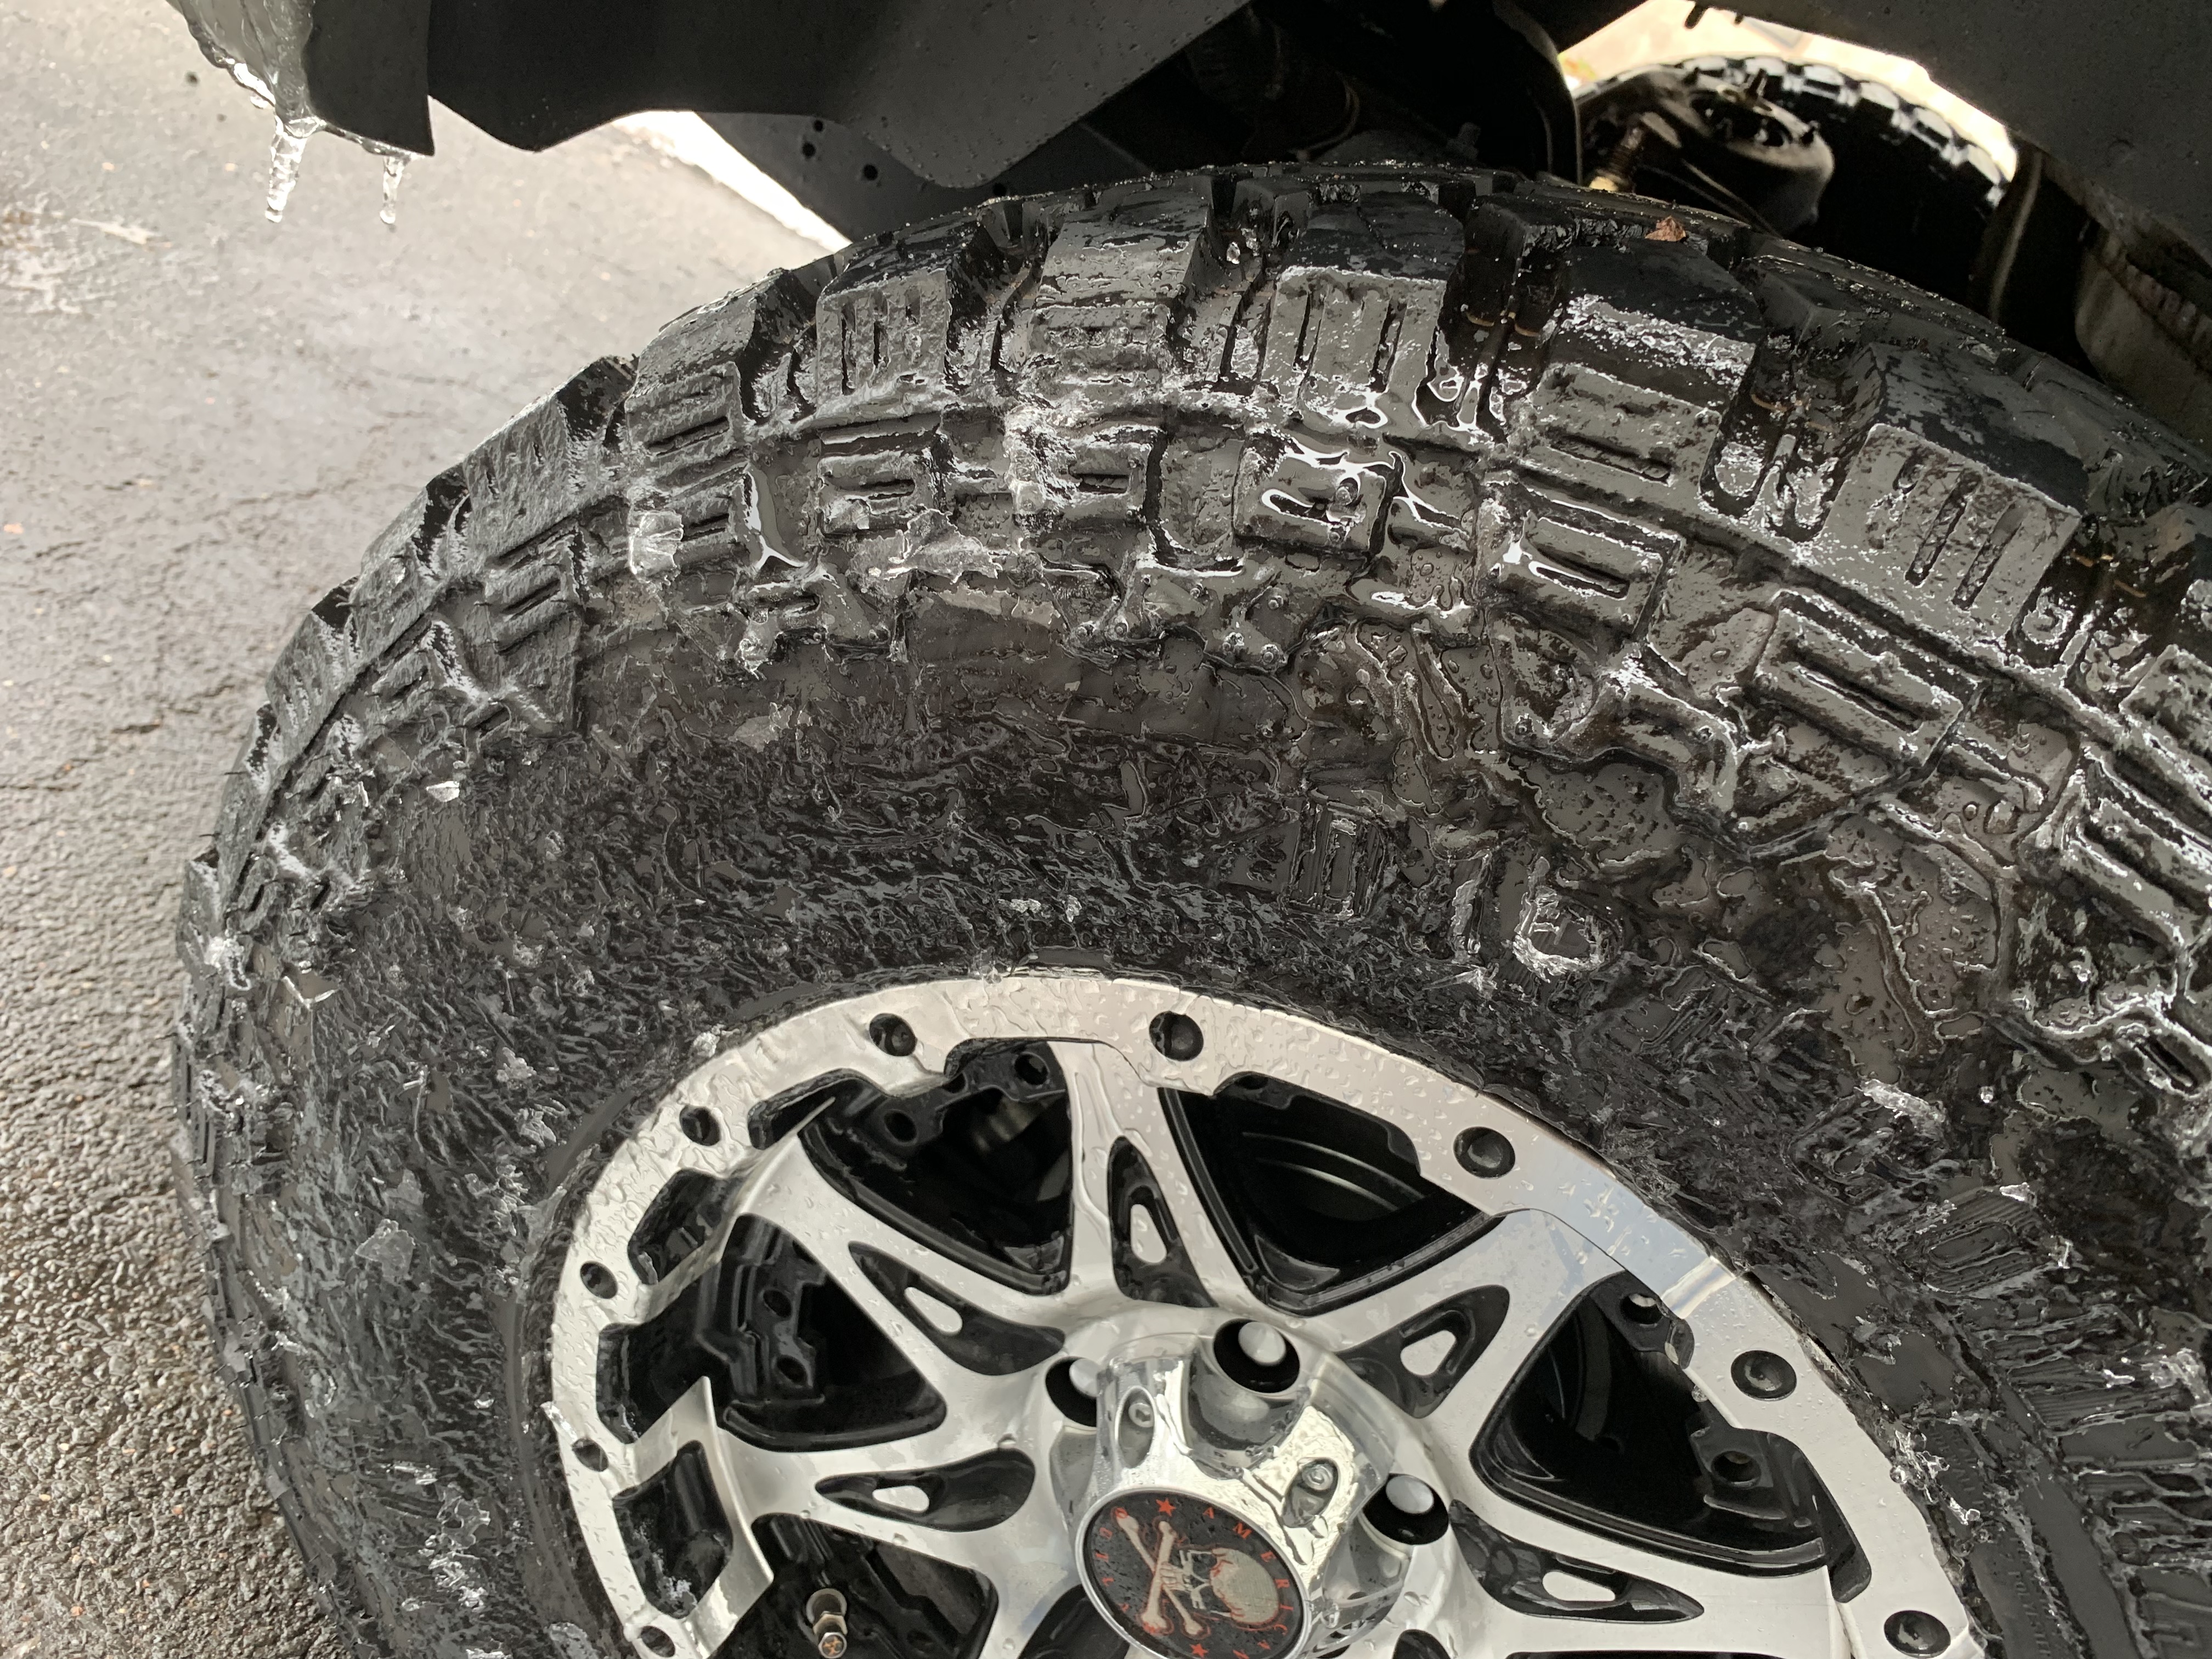 Iced up tires